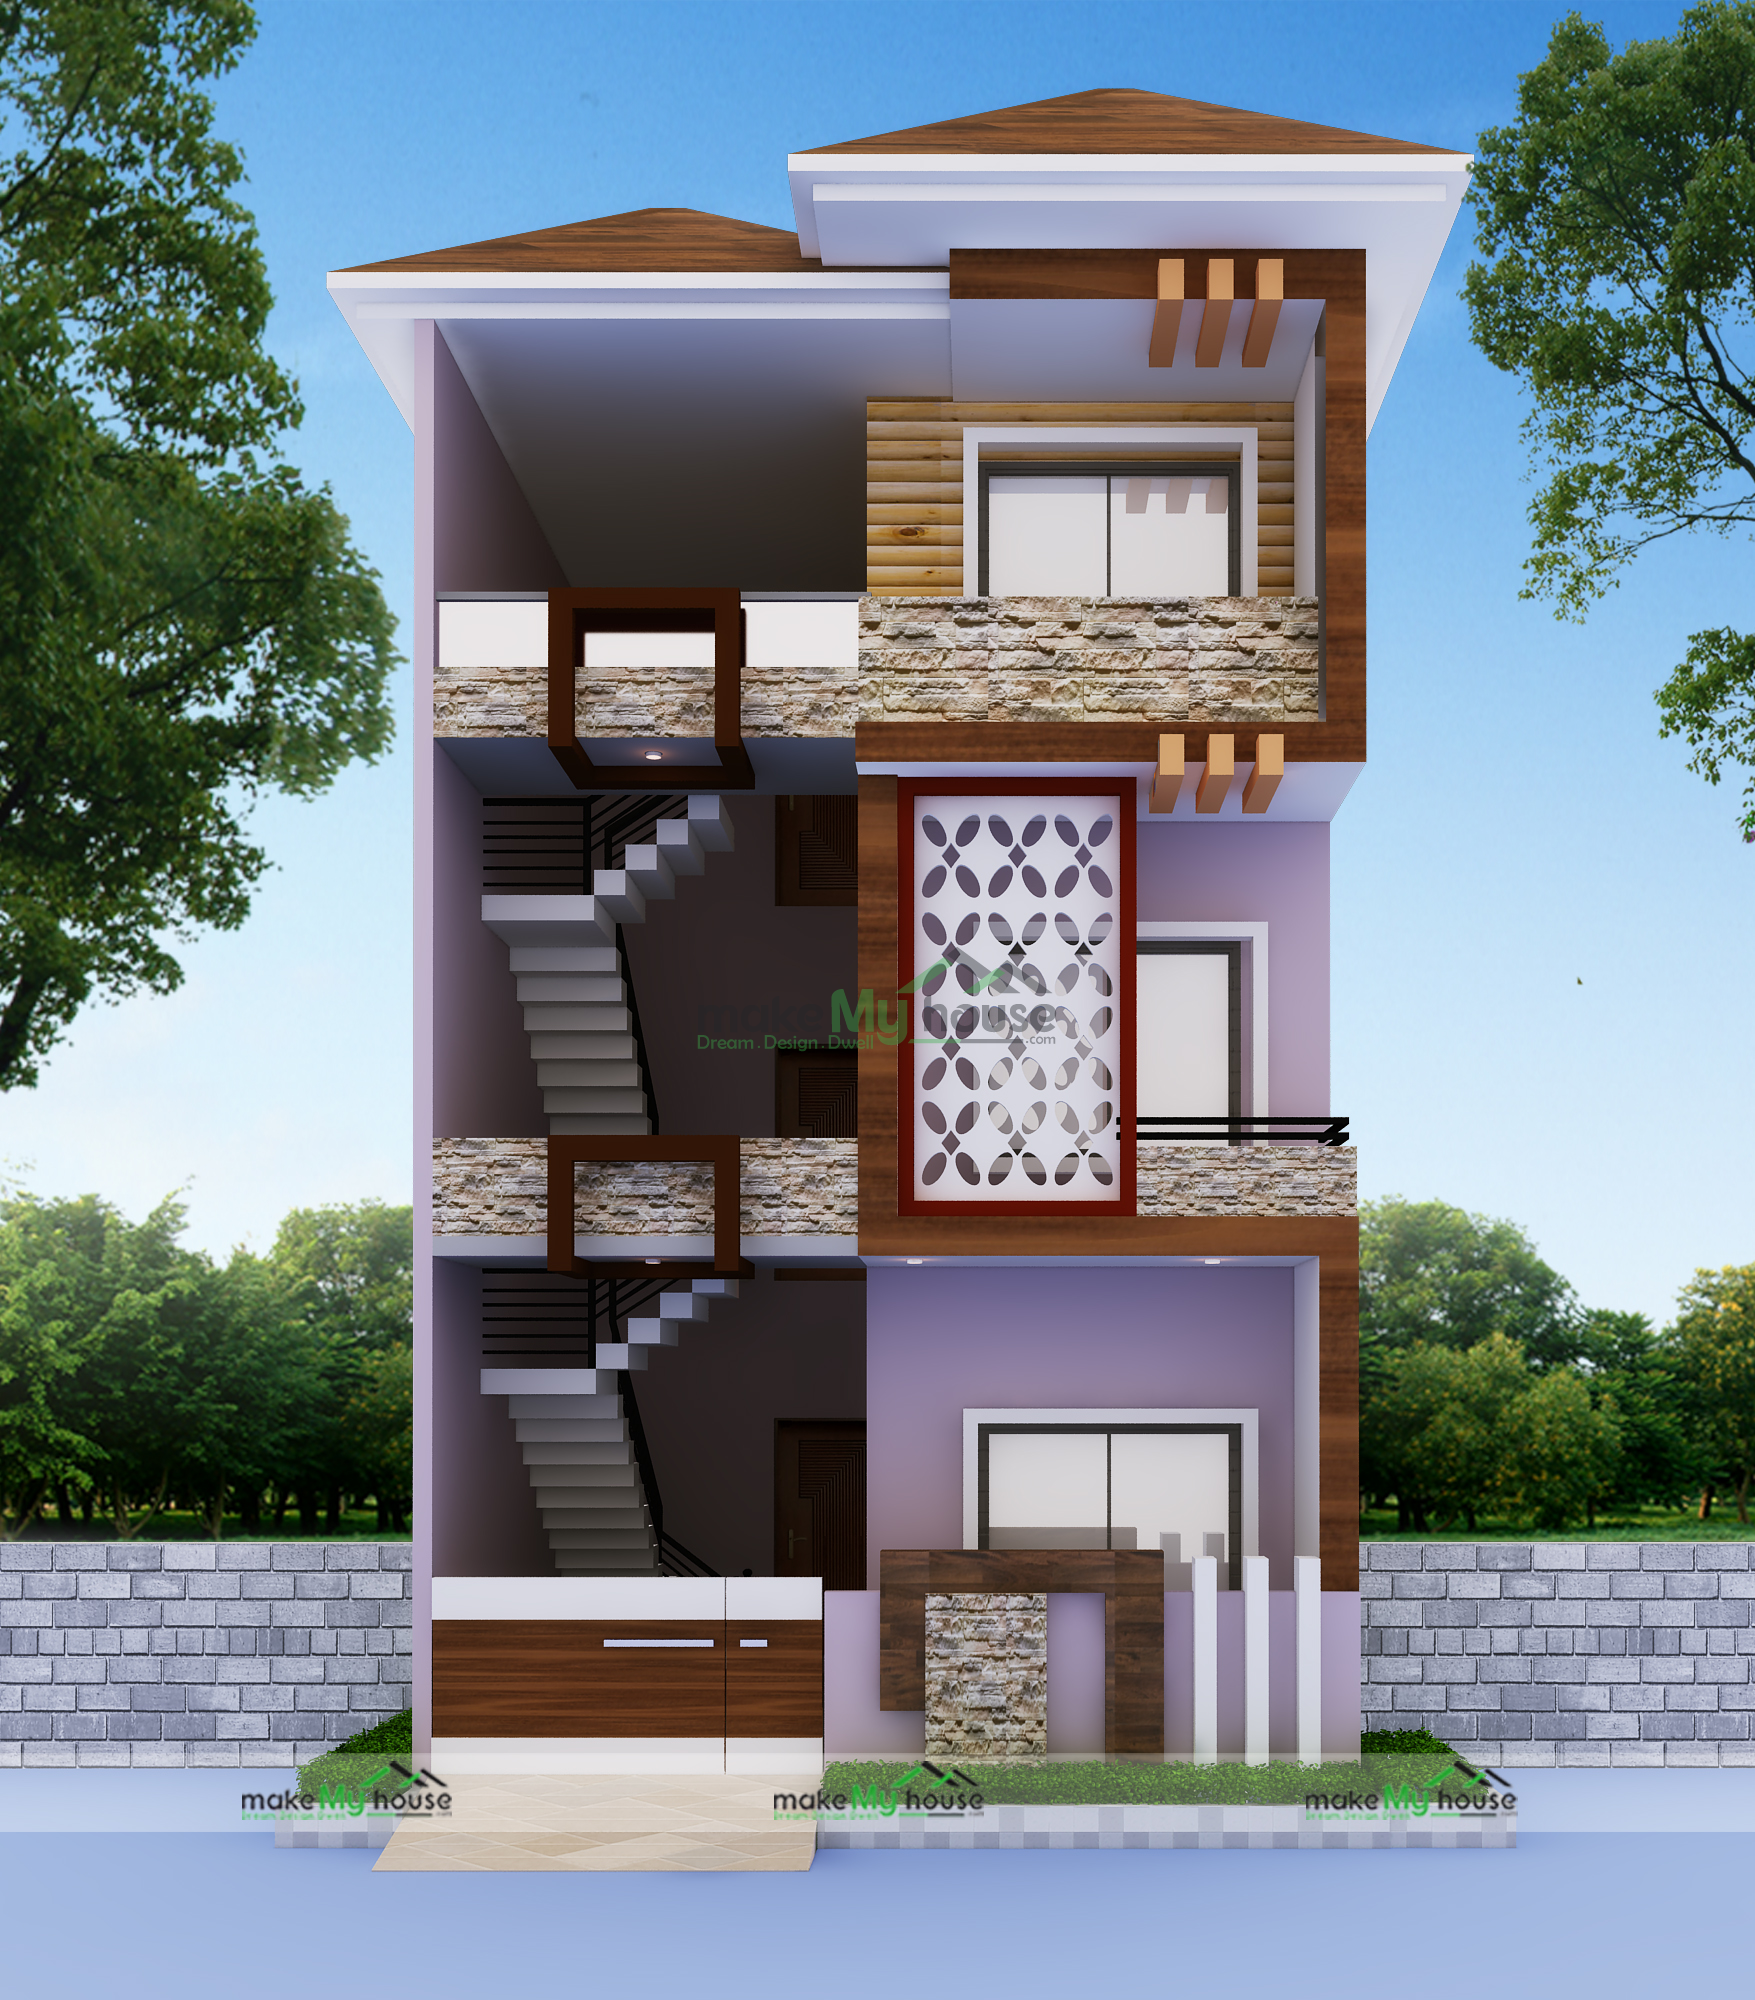 Is 2093 Sqft Sufficient For 0 Bhk House